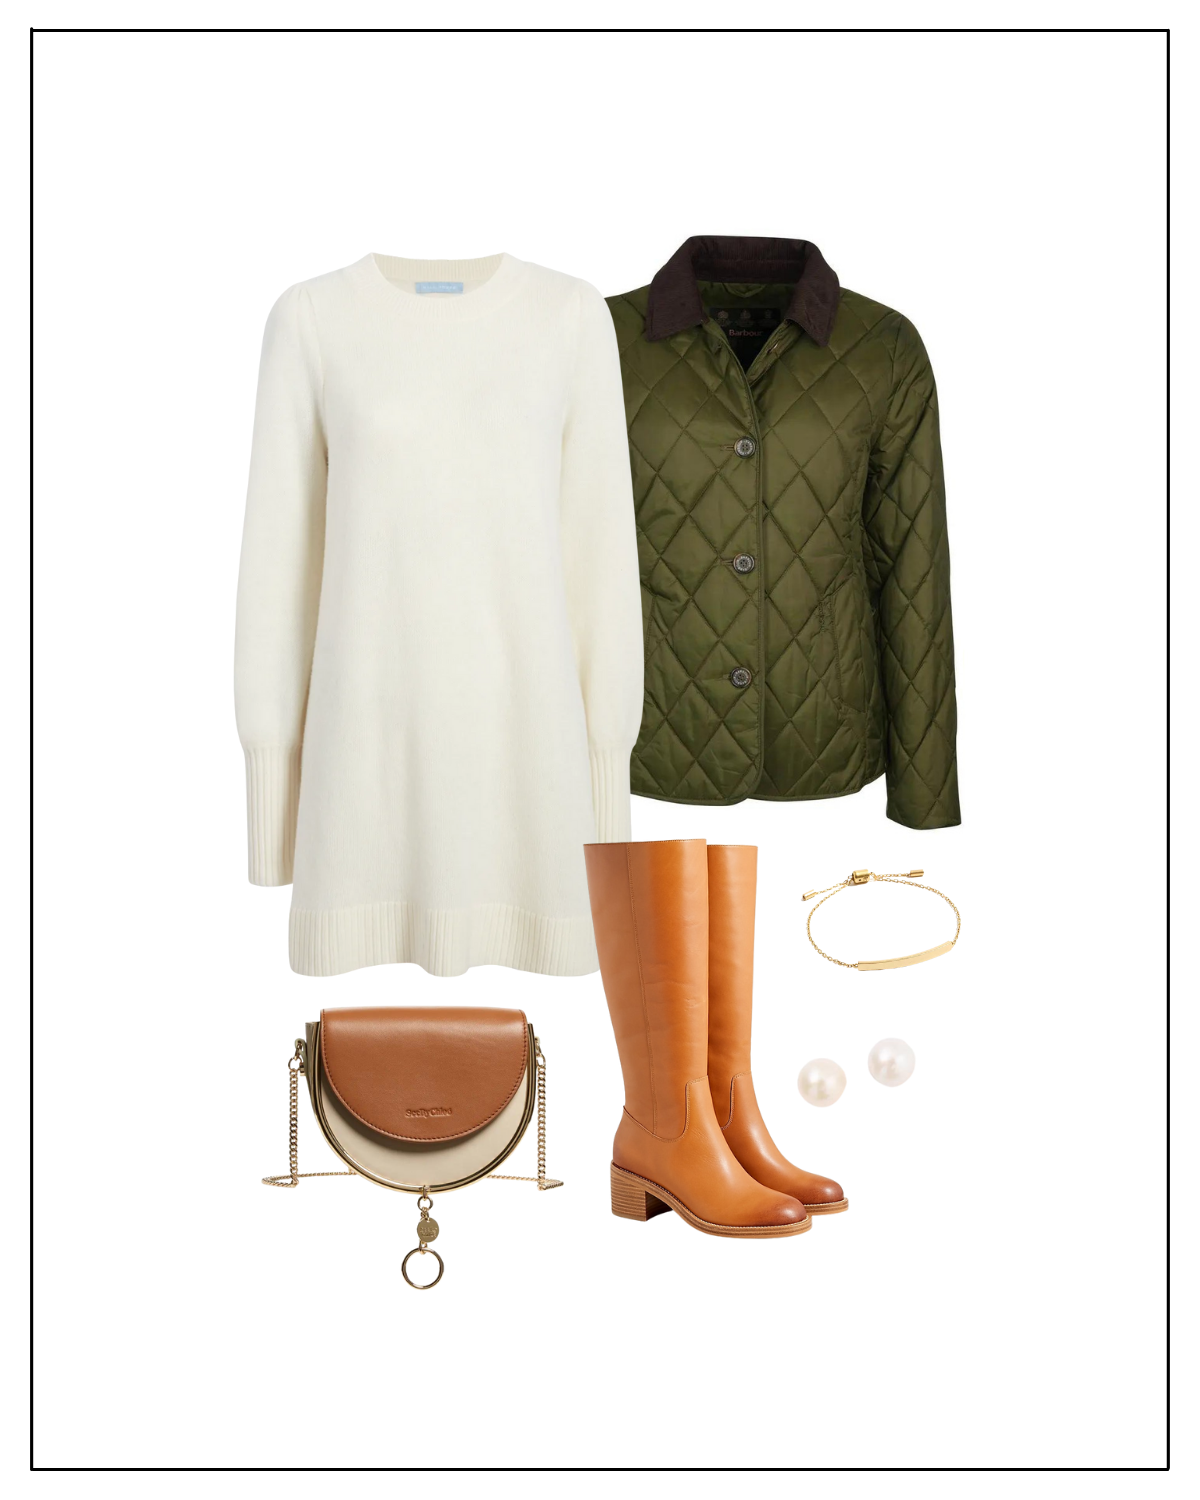 How to Style a Sweater Dress with a Quilted Jacket